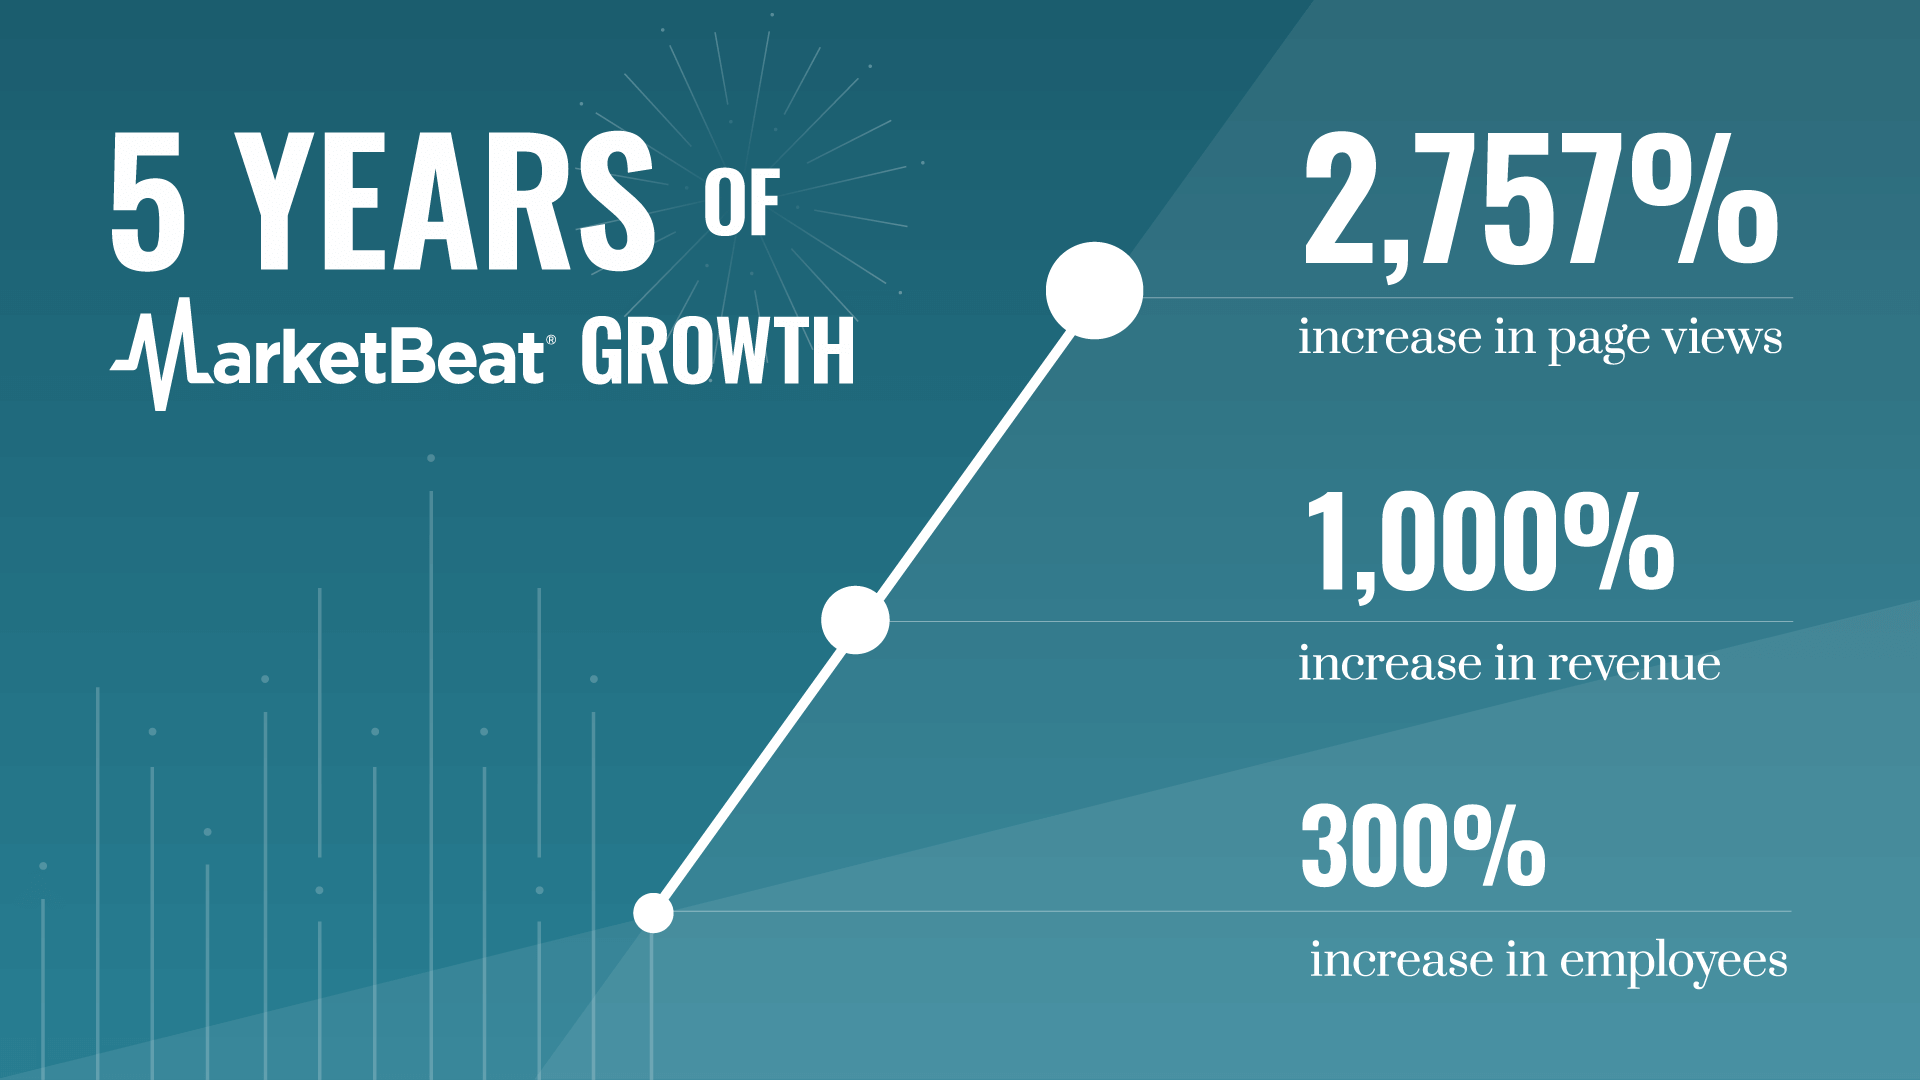 5 Years of MarketBeat Growh - 2,757% increase in page views, 1,000% increase in revenue, 300% increase in employees